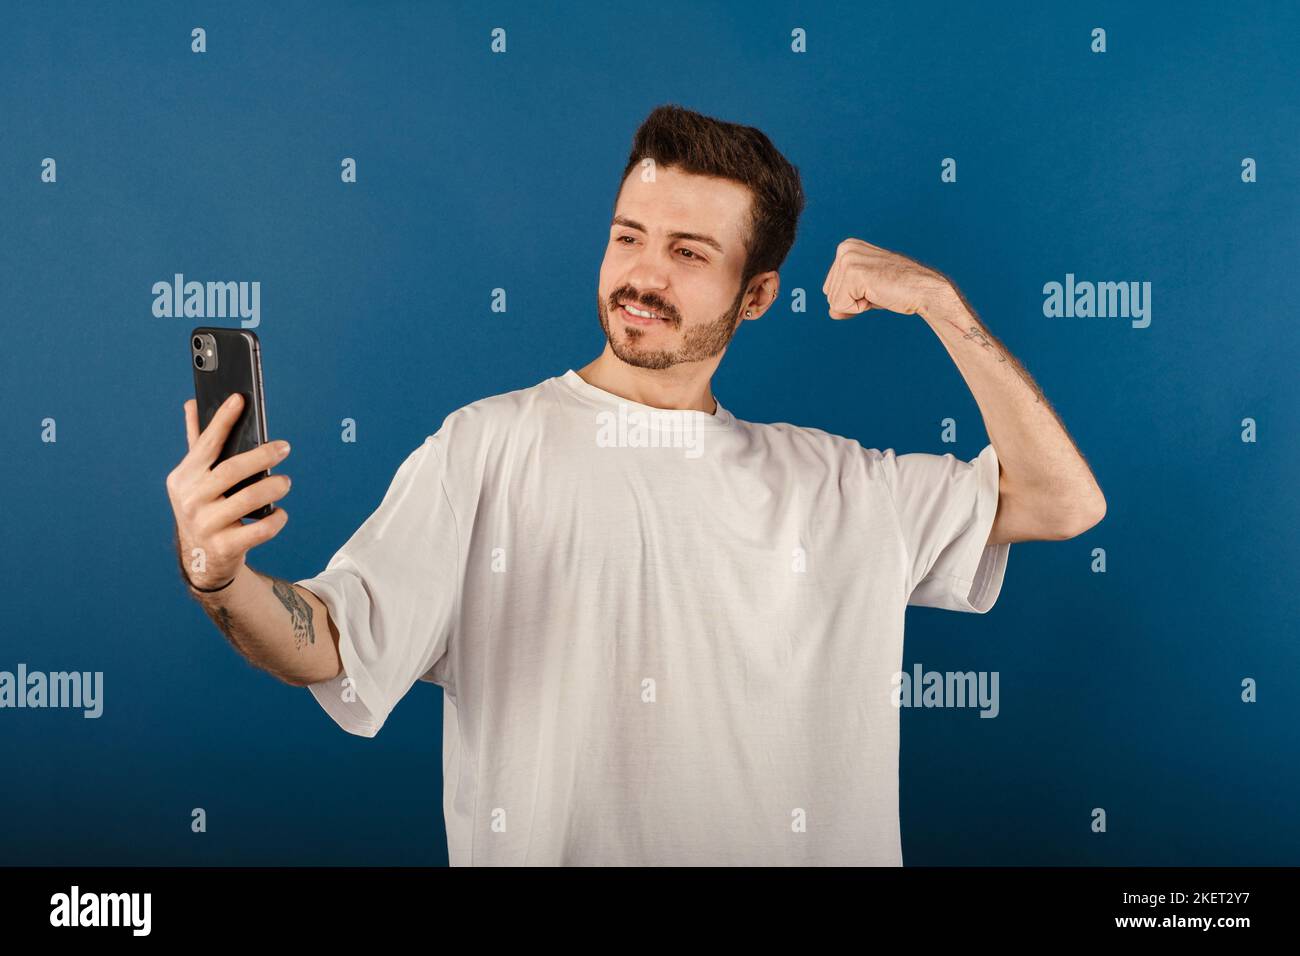 Portrait of cheerful man wearing white t-shirt posing isolated over blue background taking selfie, showing strong arm, flexing biceps and posing for p Stock Photo